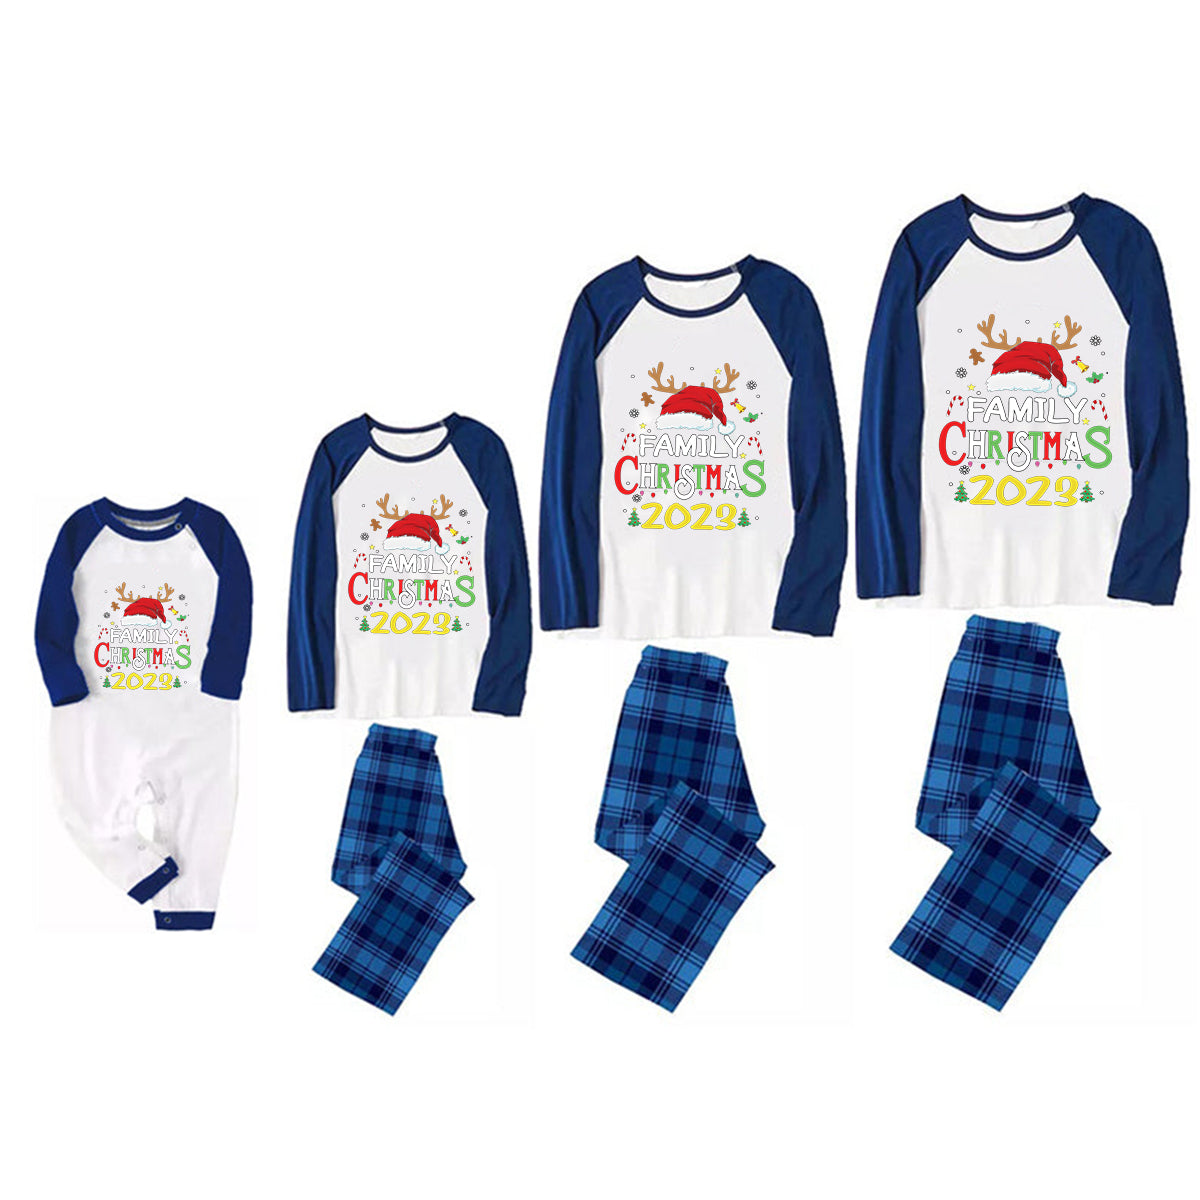 Family Christmas Shirts Santa Hat Christmas Deer Patterned and 'FAMILY CHRISTMAS 2023  ' Letter Print Grey Casual Long Sleeve Sweatshirts Contrast Blue & White Top and Black and Blue Plaid Pants Family Matching Pajamas Sets